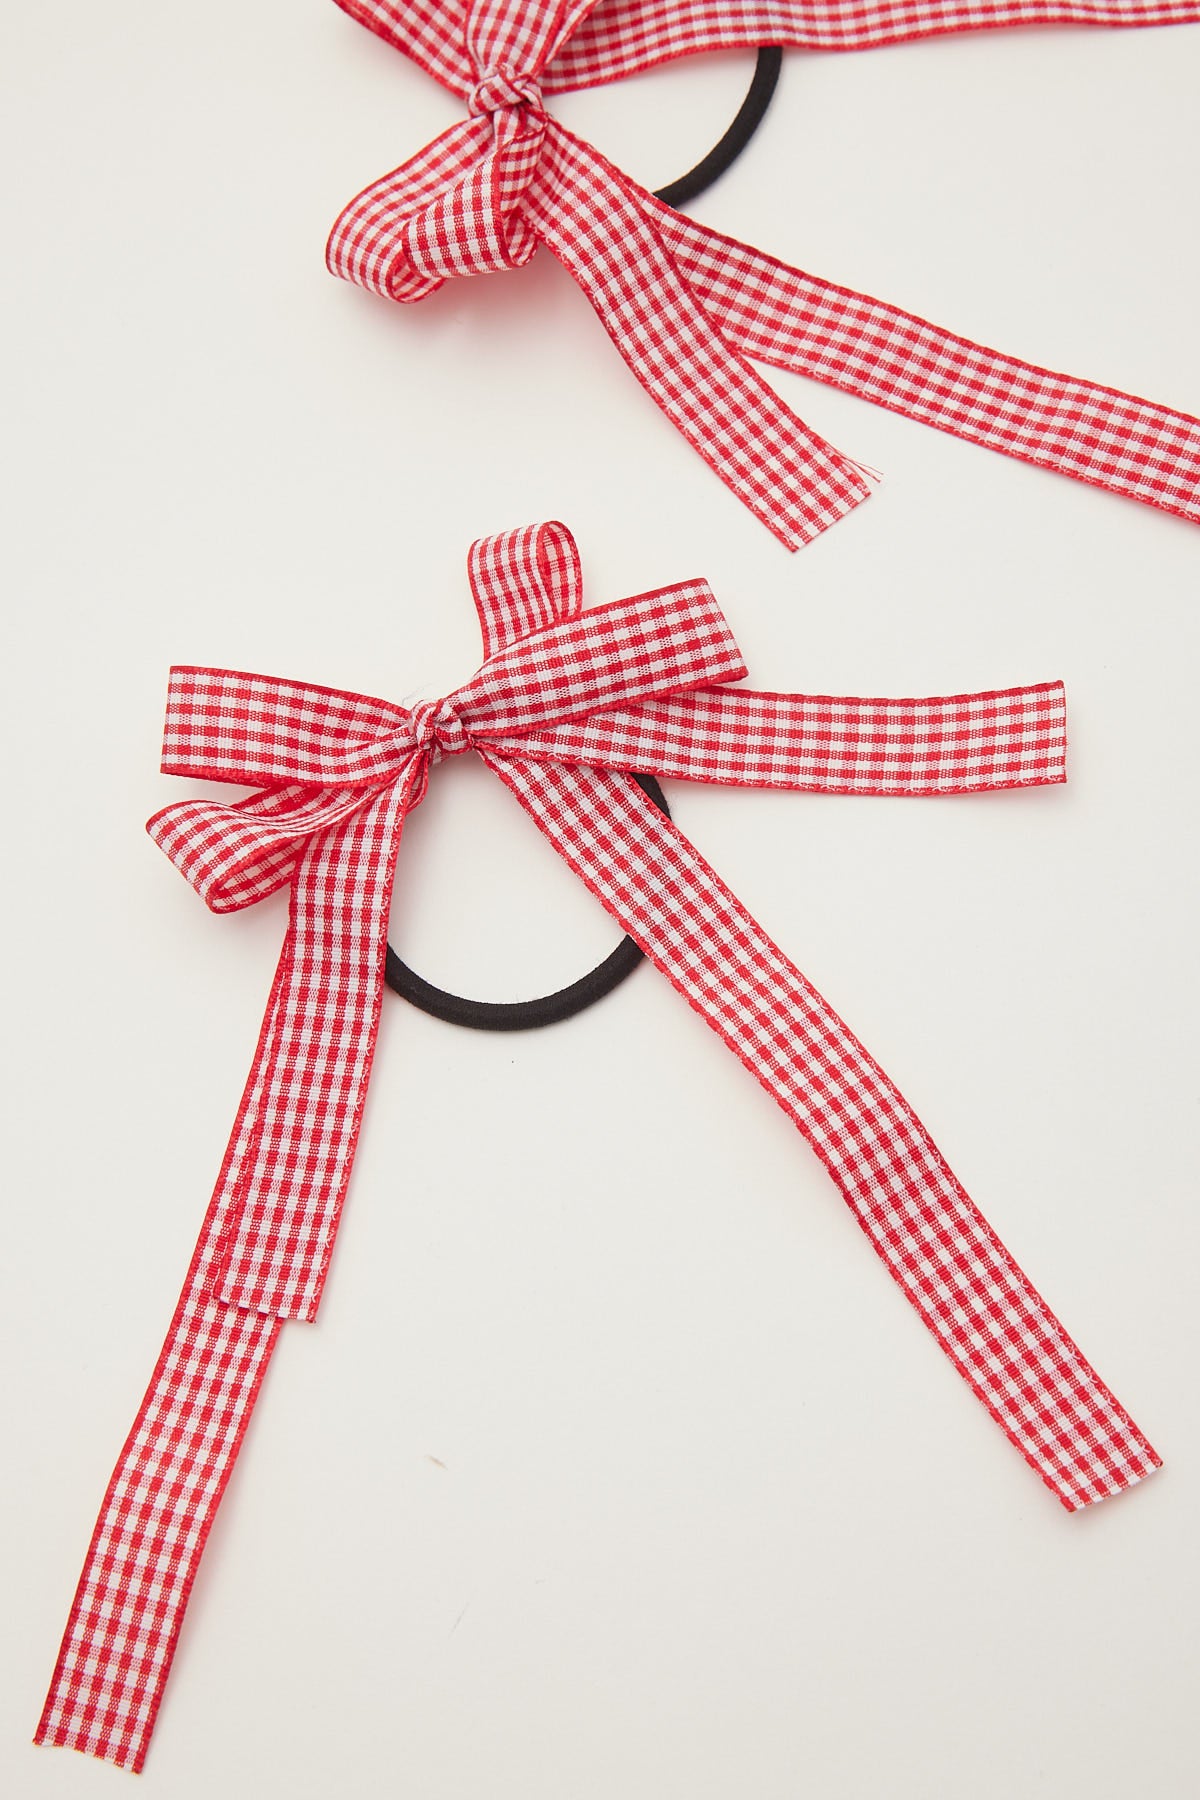 Token Red Gingham Bow Hair Tie 2 Pack Red Print